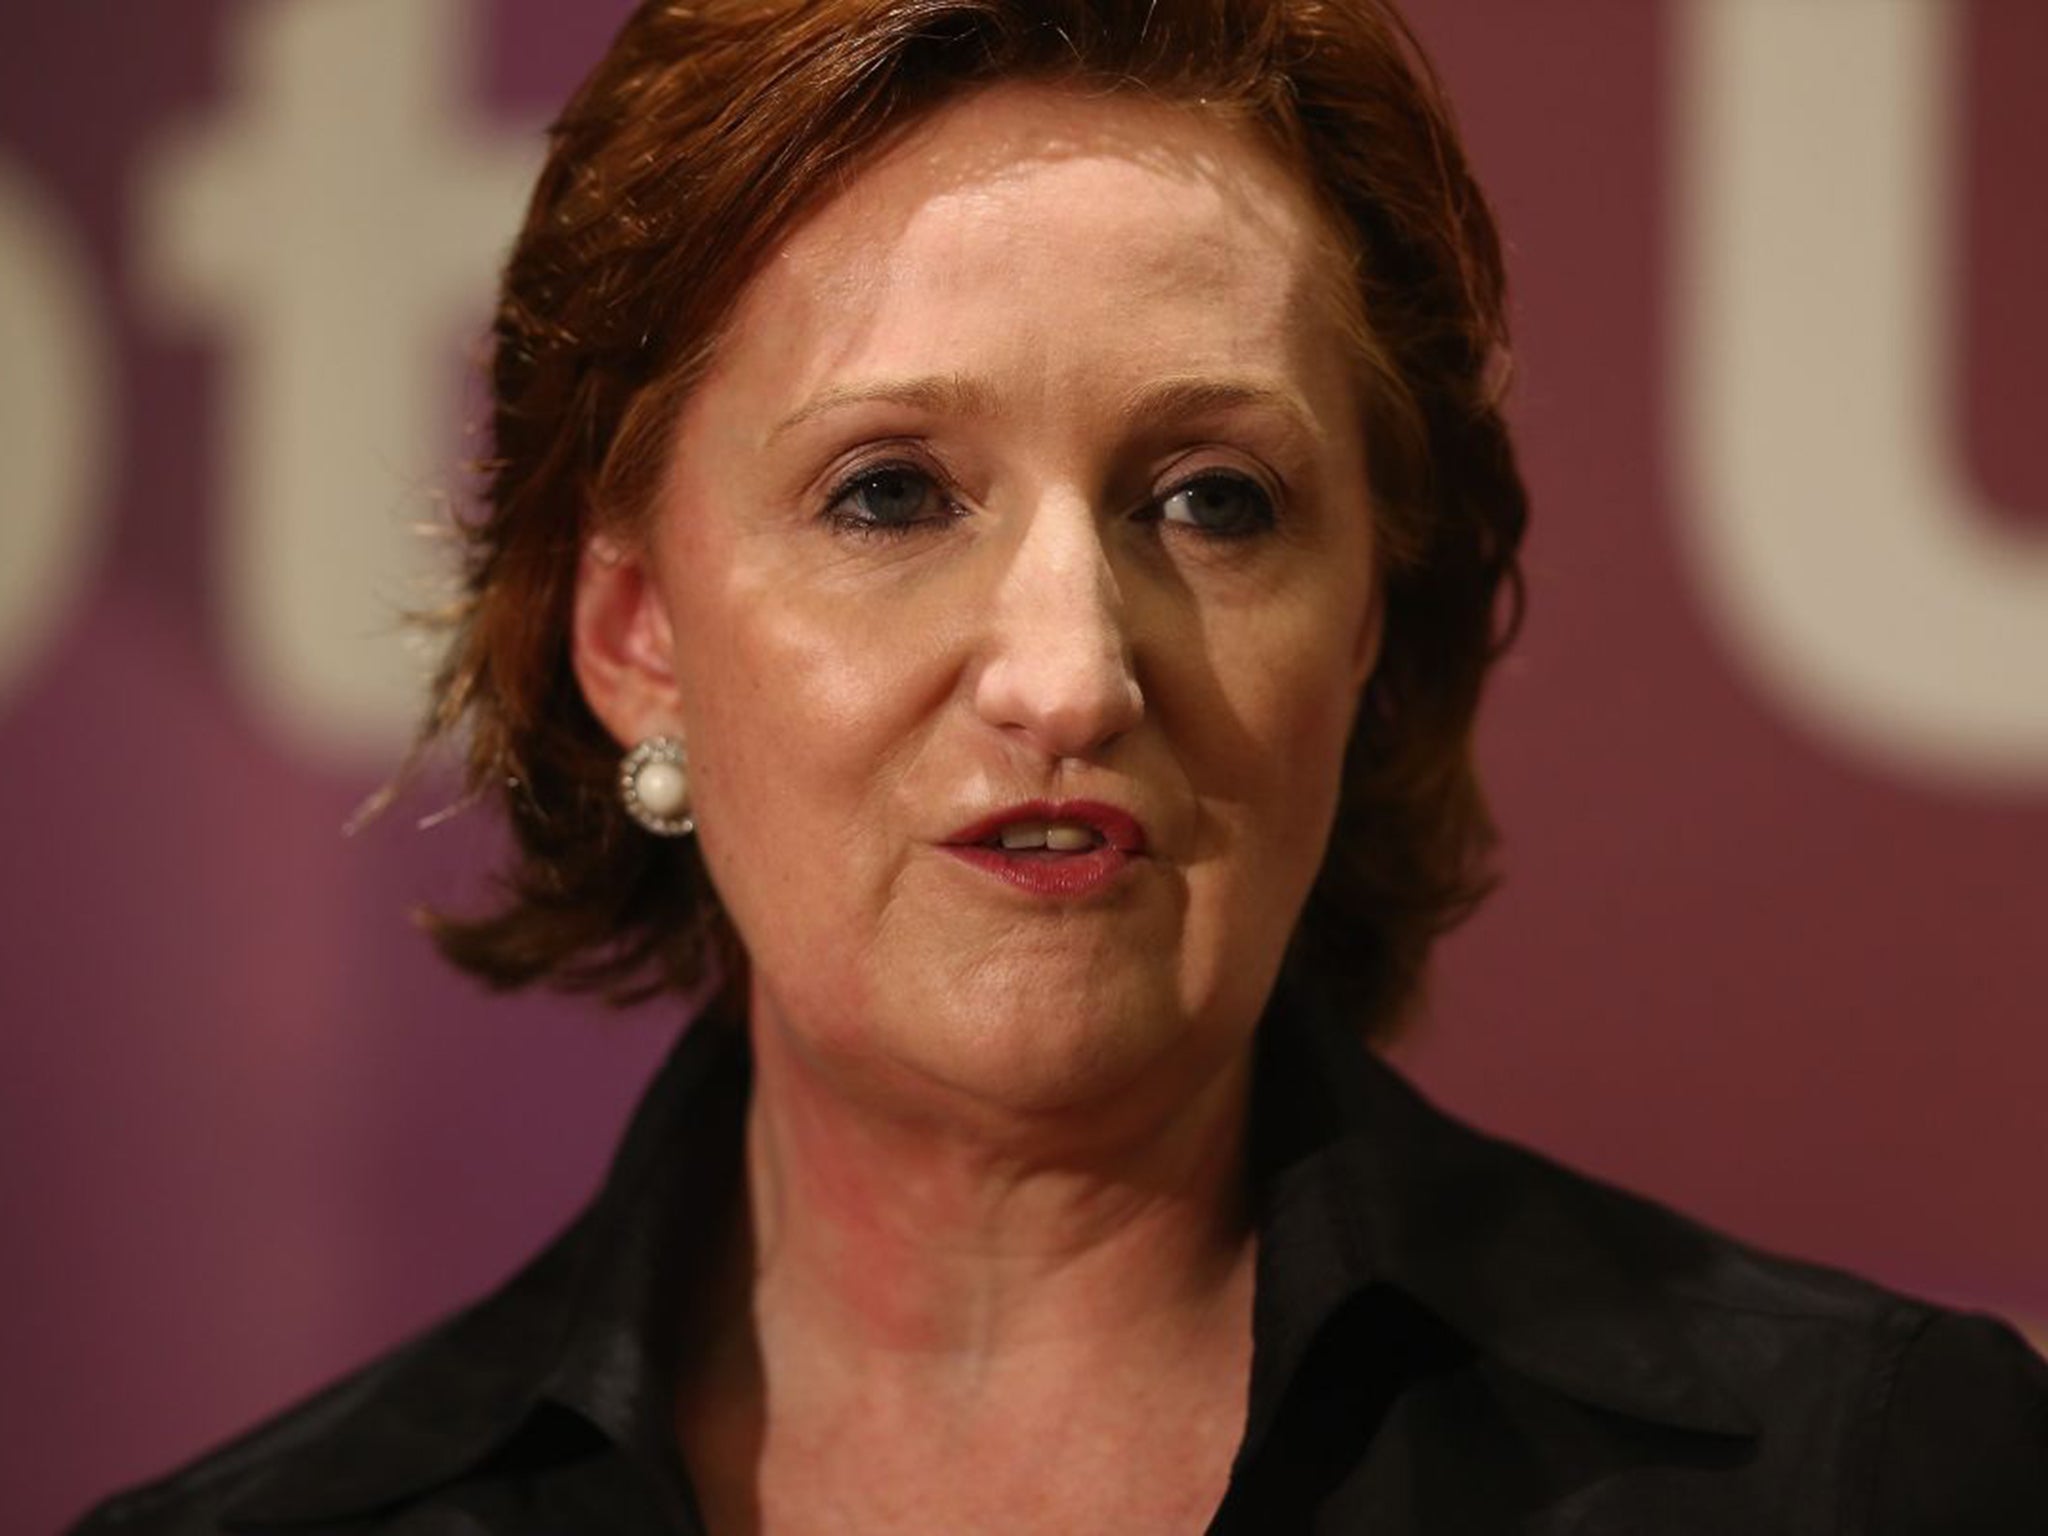 Suzanne Evans was once seen as the next leader of Ukip